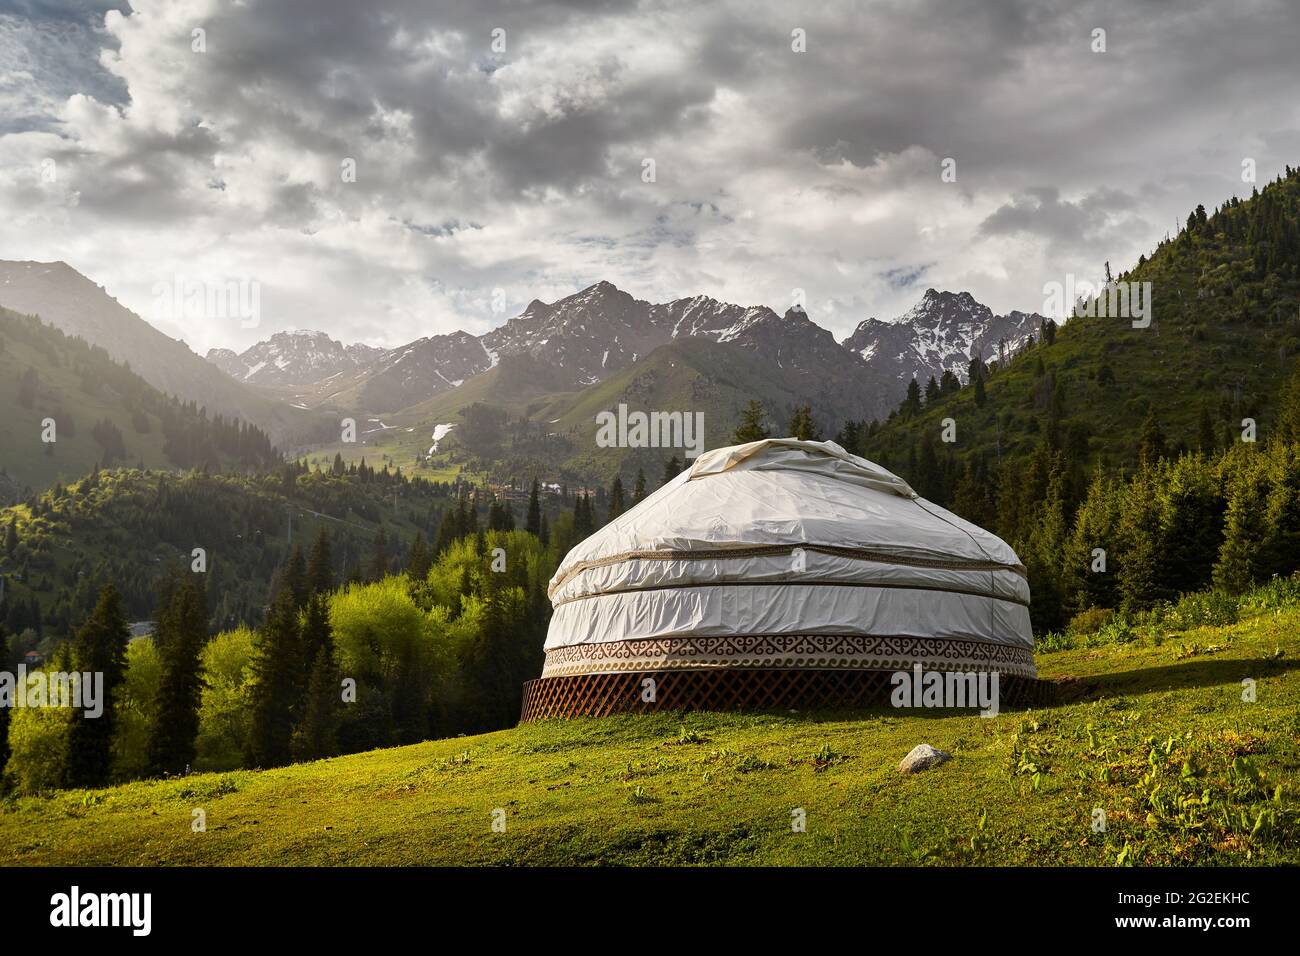 Guest house complex of white Yurt nomadic house at green mountain valley in Almaty, Kazakhstan Stock Photo